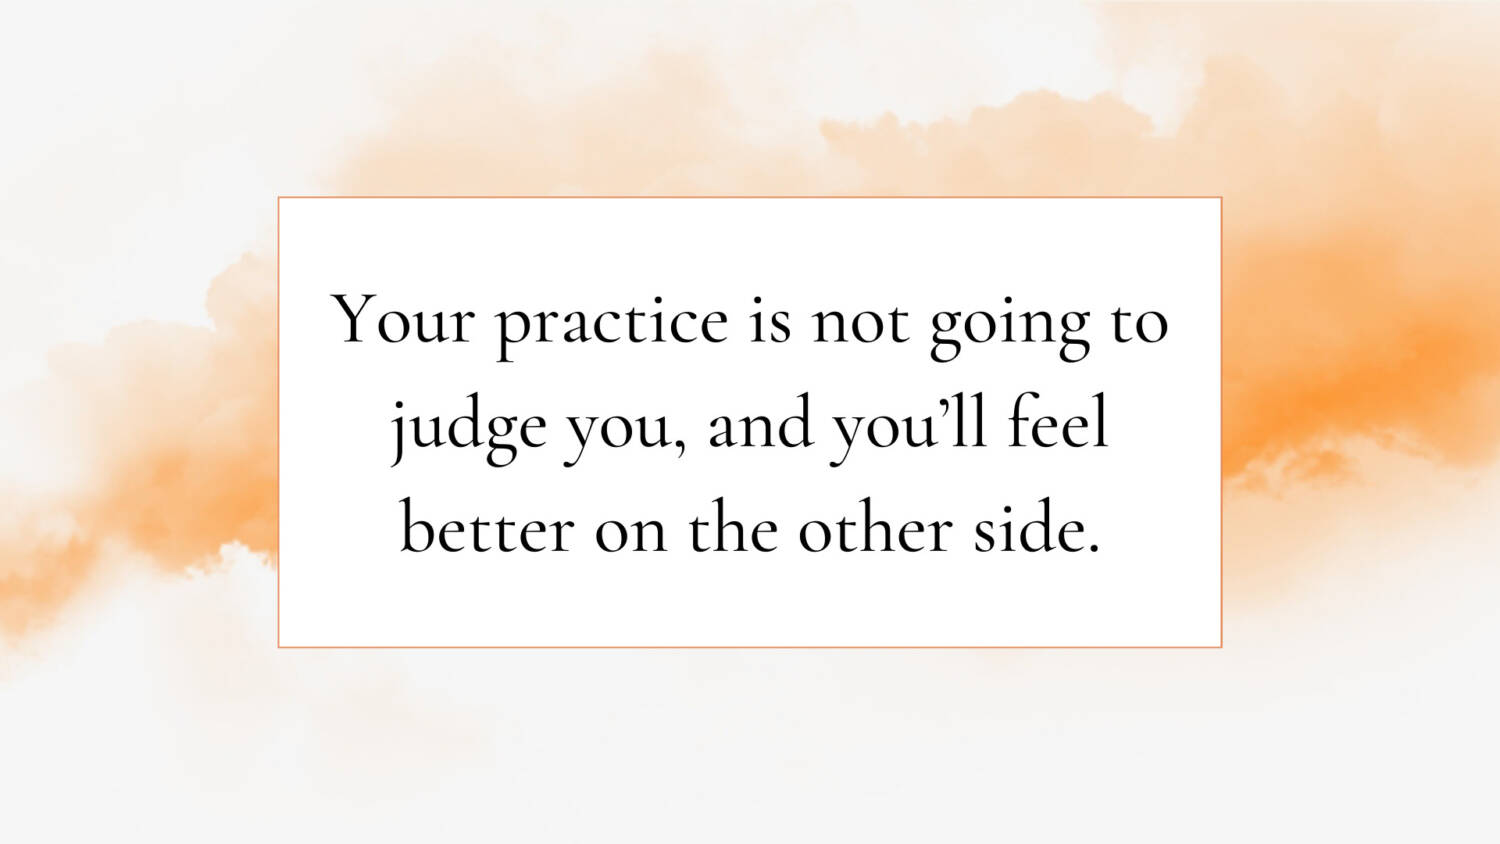 Your practice is not going to judge you, and you’ll feel better on the other side.